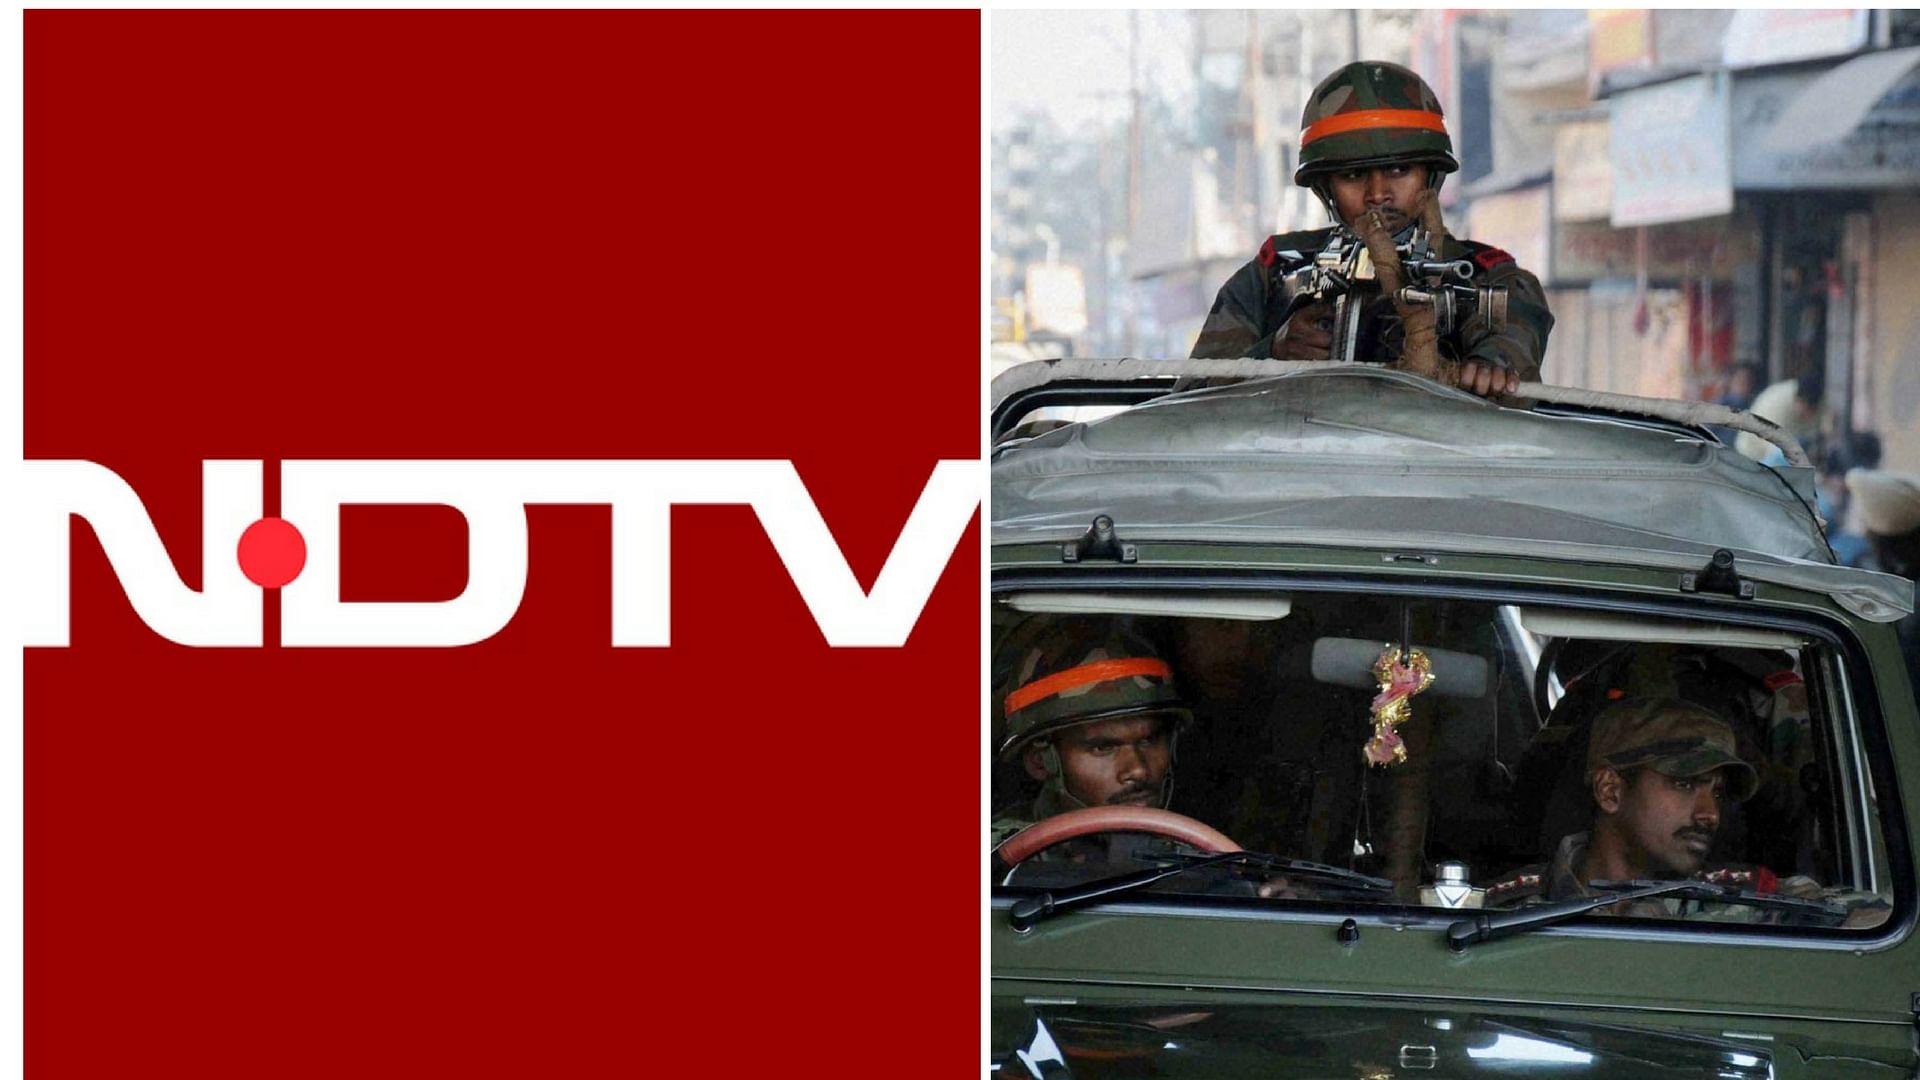 NDTV might go off air for a day for its Pathankot coverage. (Photo: The Quint)